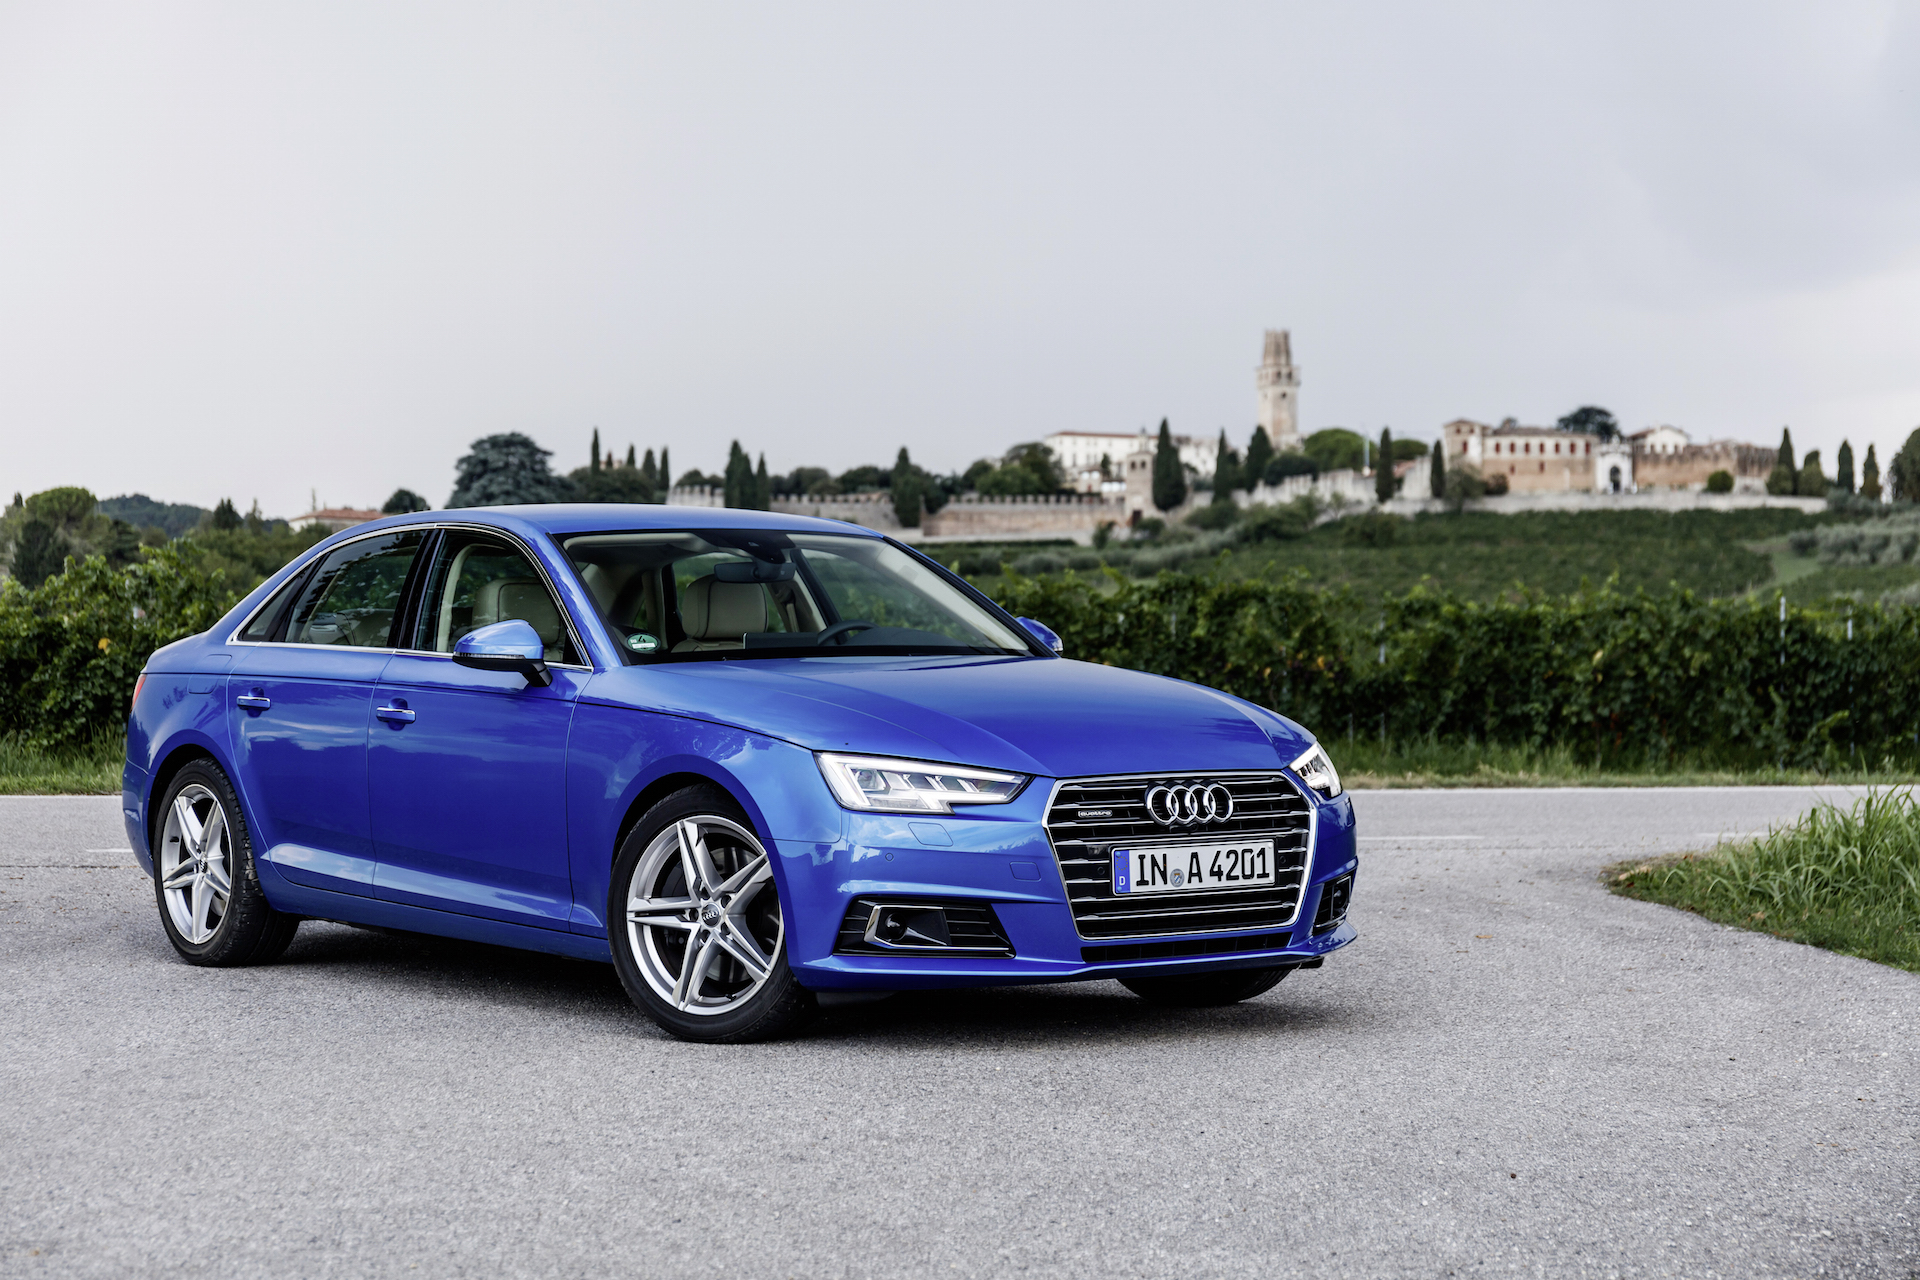 Motor Authority Best Car To Buy Nominee: 2017 Audi A4 - Motor Authority